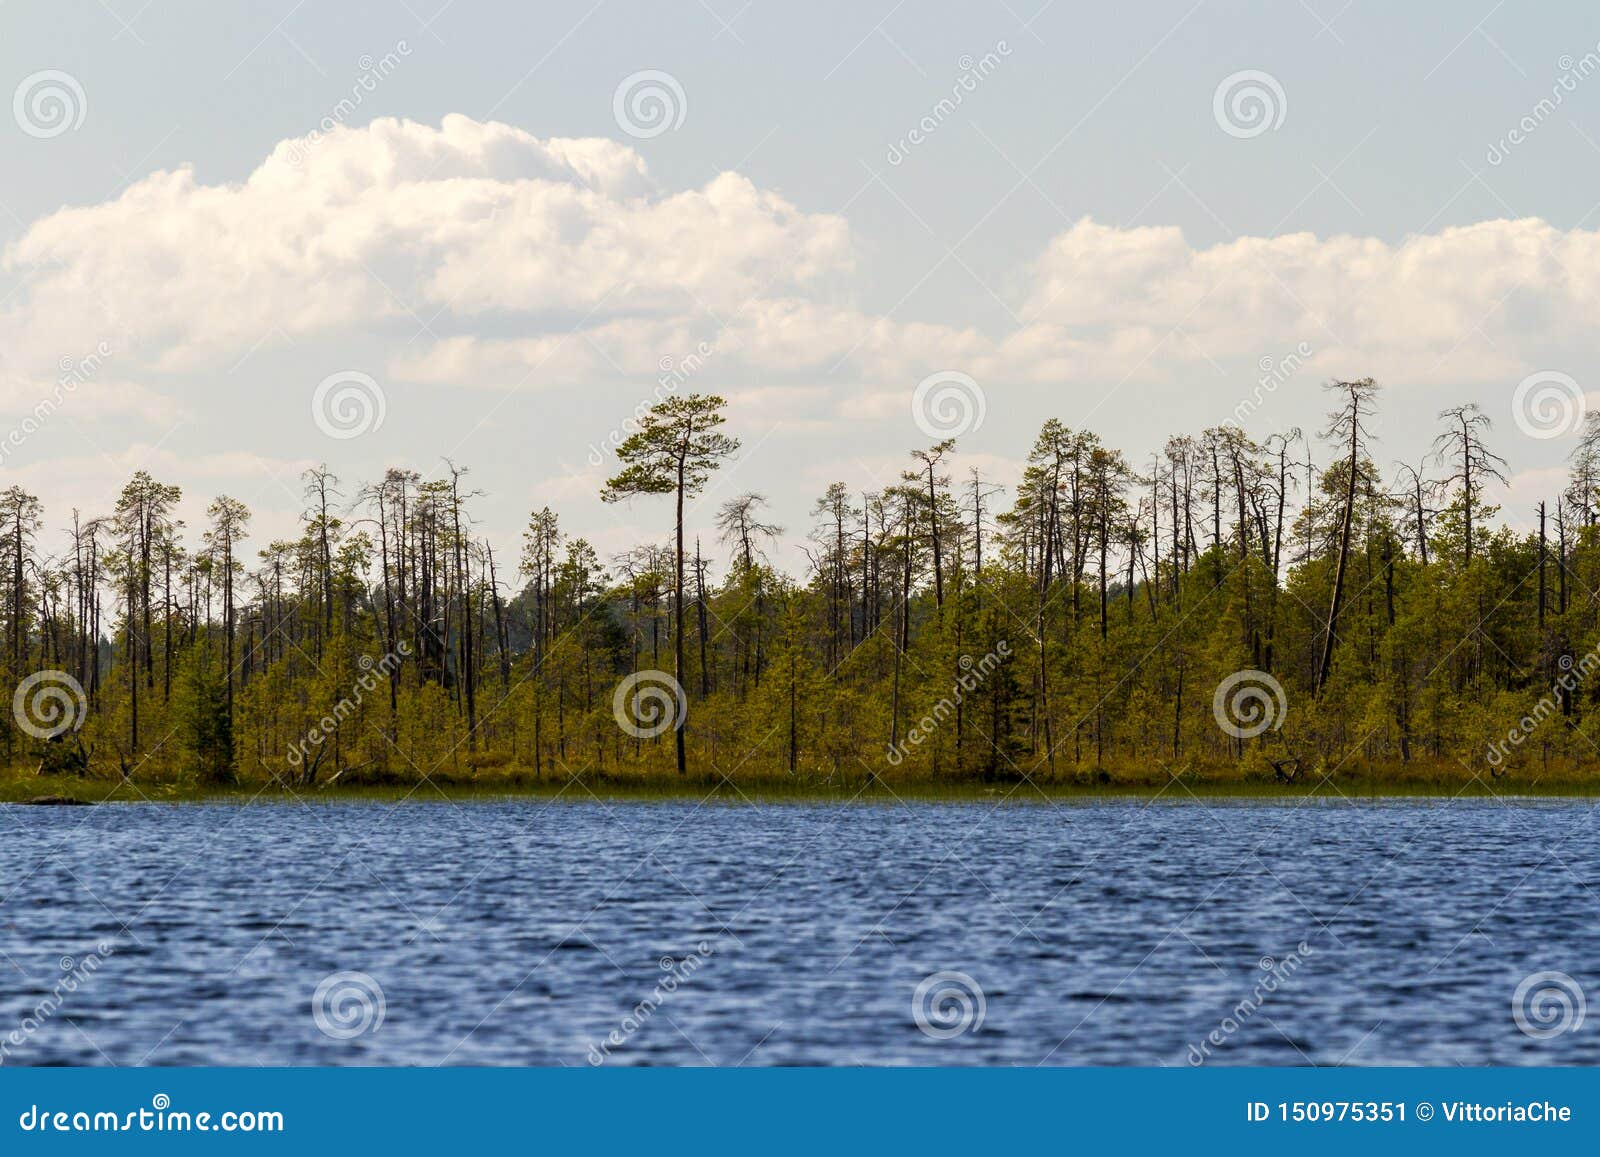 forest on the shore of the lake keret. russia, karelia